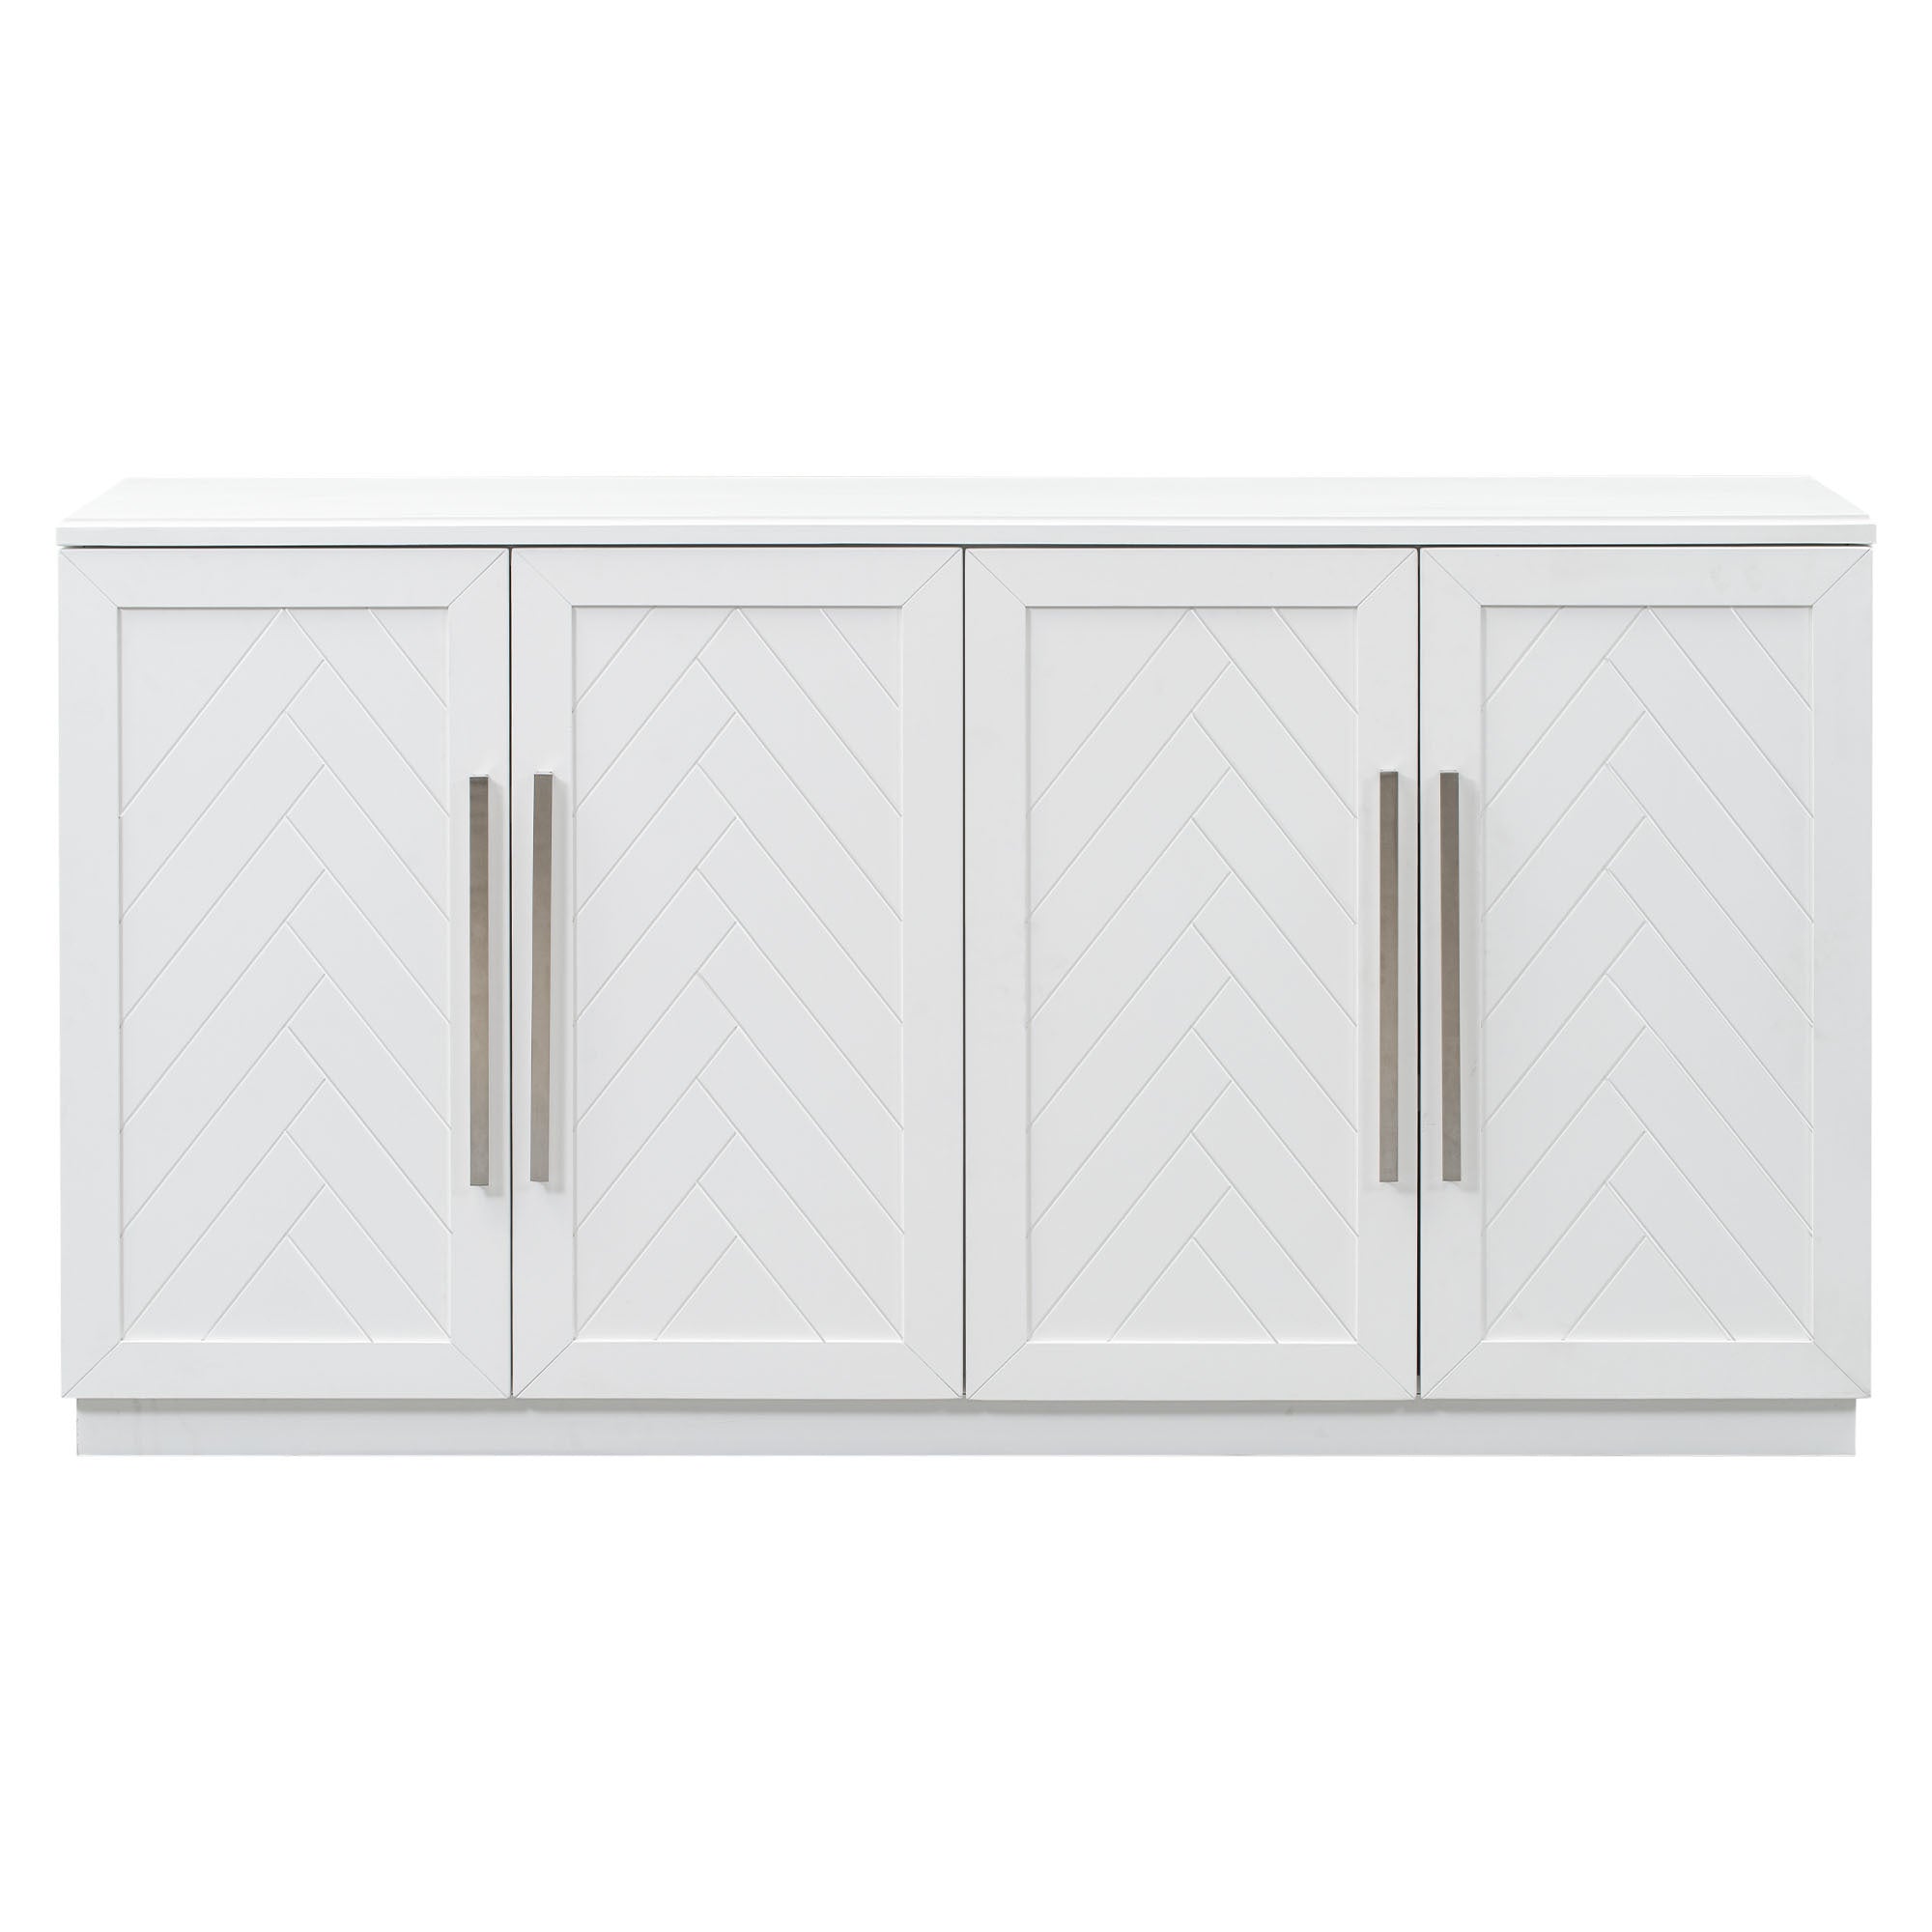 Sideboard with 4 Doors Large Storage Space white-solid wood+mdf